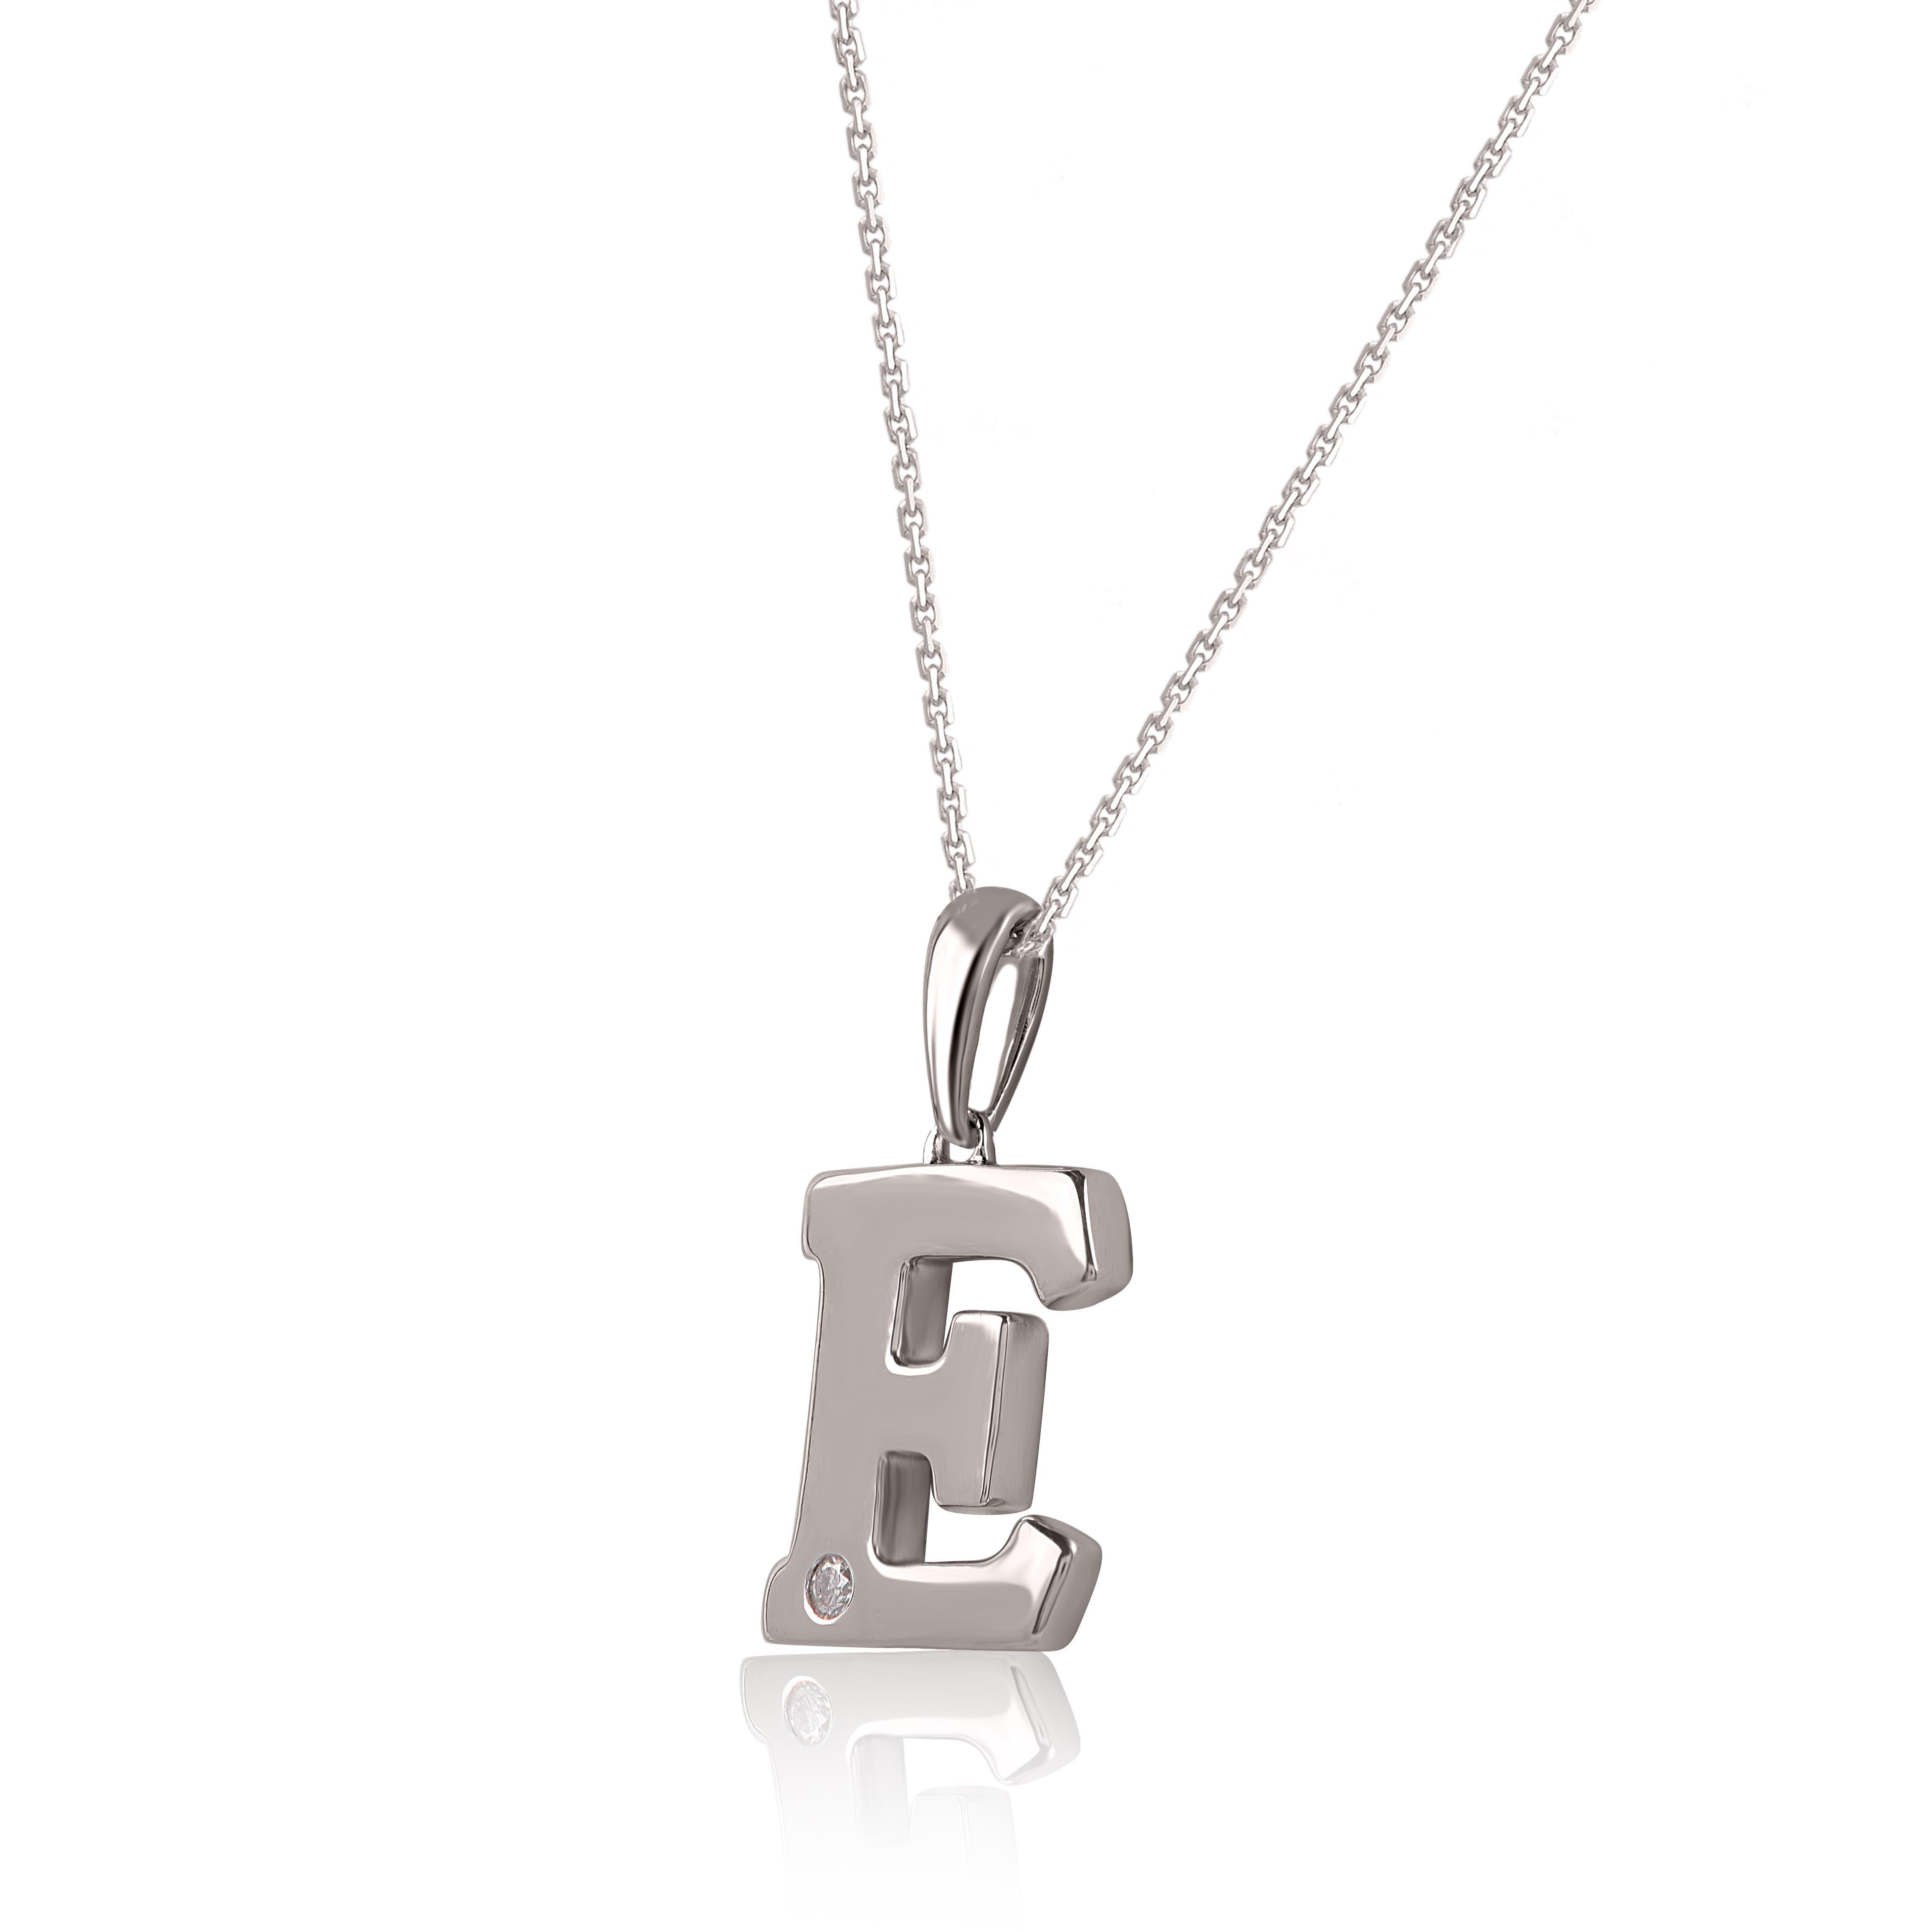 Diamond studded letter charm pendant is a piece of jewelry that is a favorite with everyone. Made by skillful craftsmen in 14KT white gold and Studded with 1 round shaped natural brilliant cut white diamonds in flush setting and shine in H-I Color